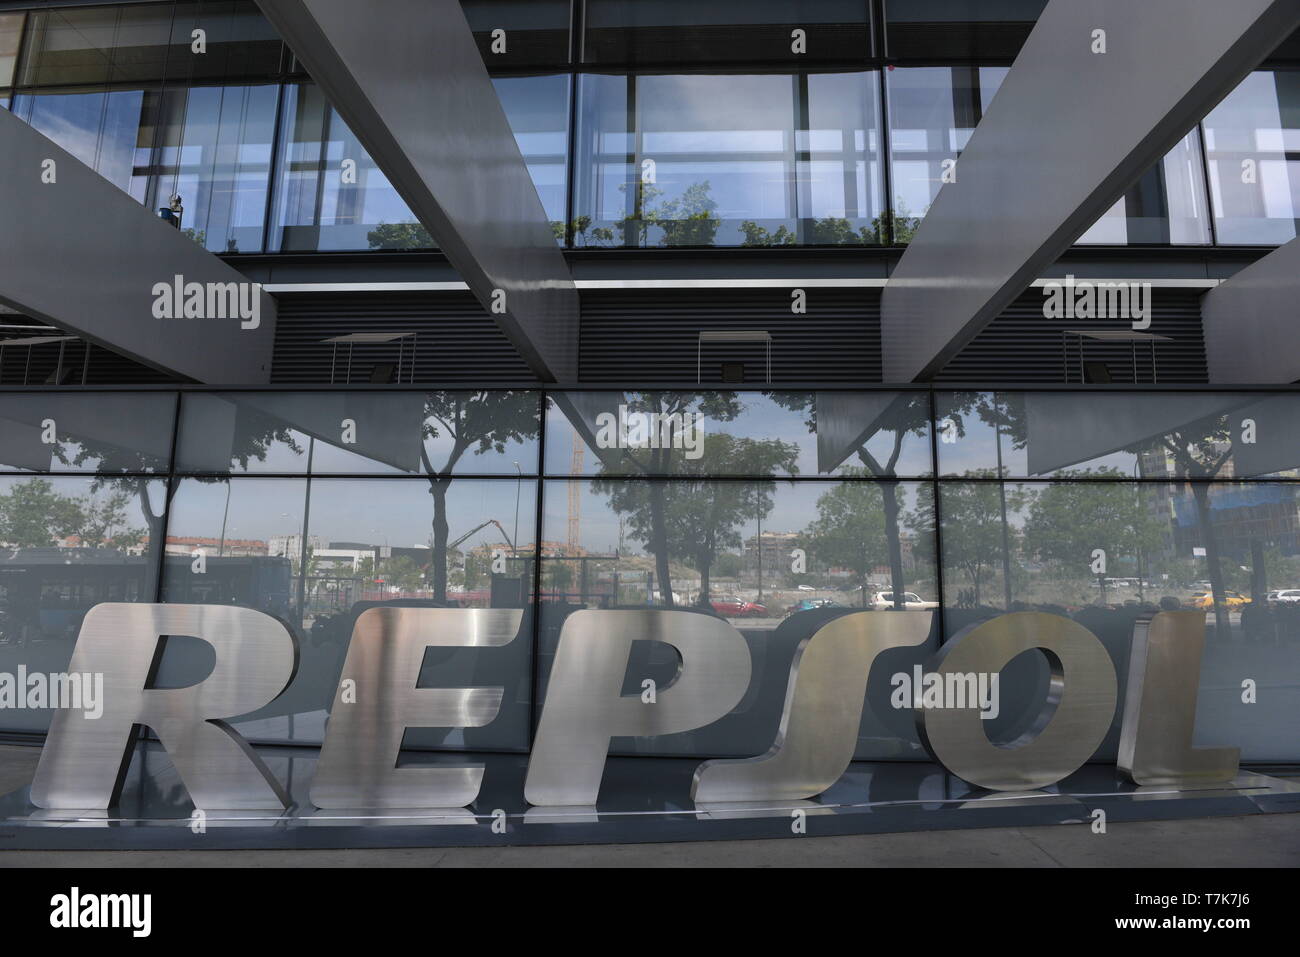 Madrid, Madrid, Spain. 7th May, 2019. The Repsol YPF SA logo is seen at the Repsol oil company headquarters in Madrid. Credit: John Milner/SOPA Images/ZUMA Wire/Alamy Live News Stock Photo